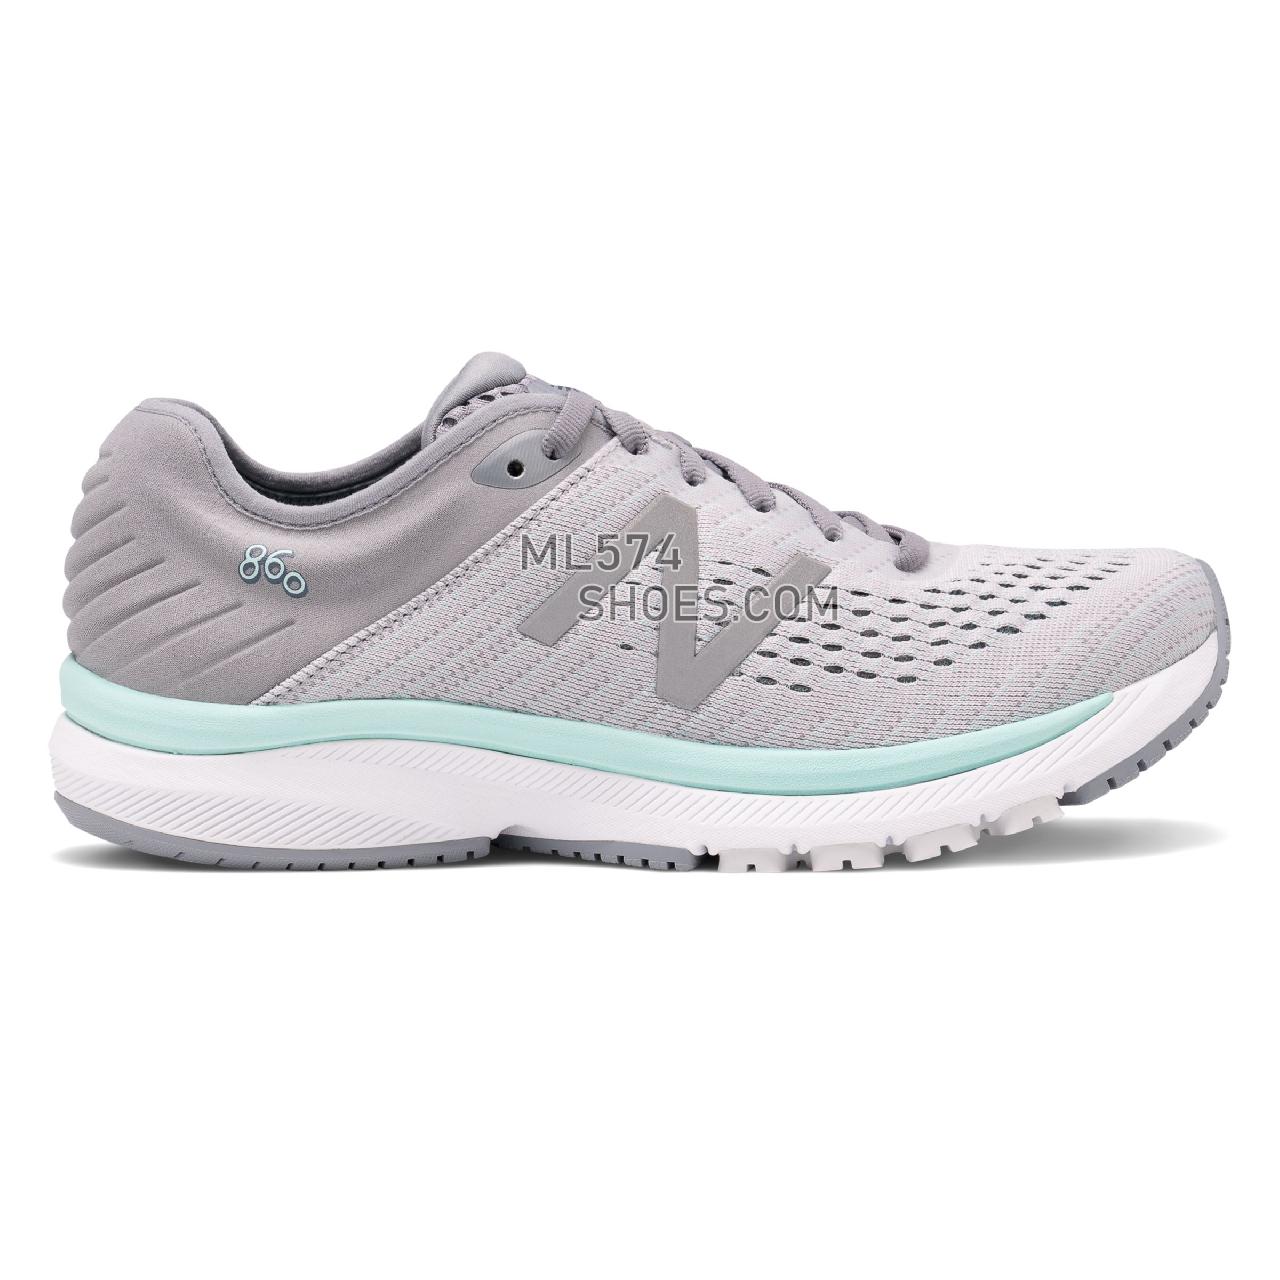 New Balance 860v10 - Women's Stability Running - Steel with Light Aluminum and Light Reef - W860P10